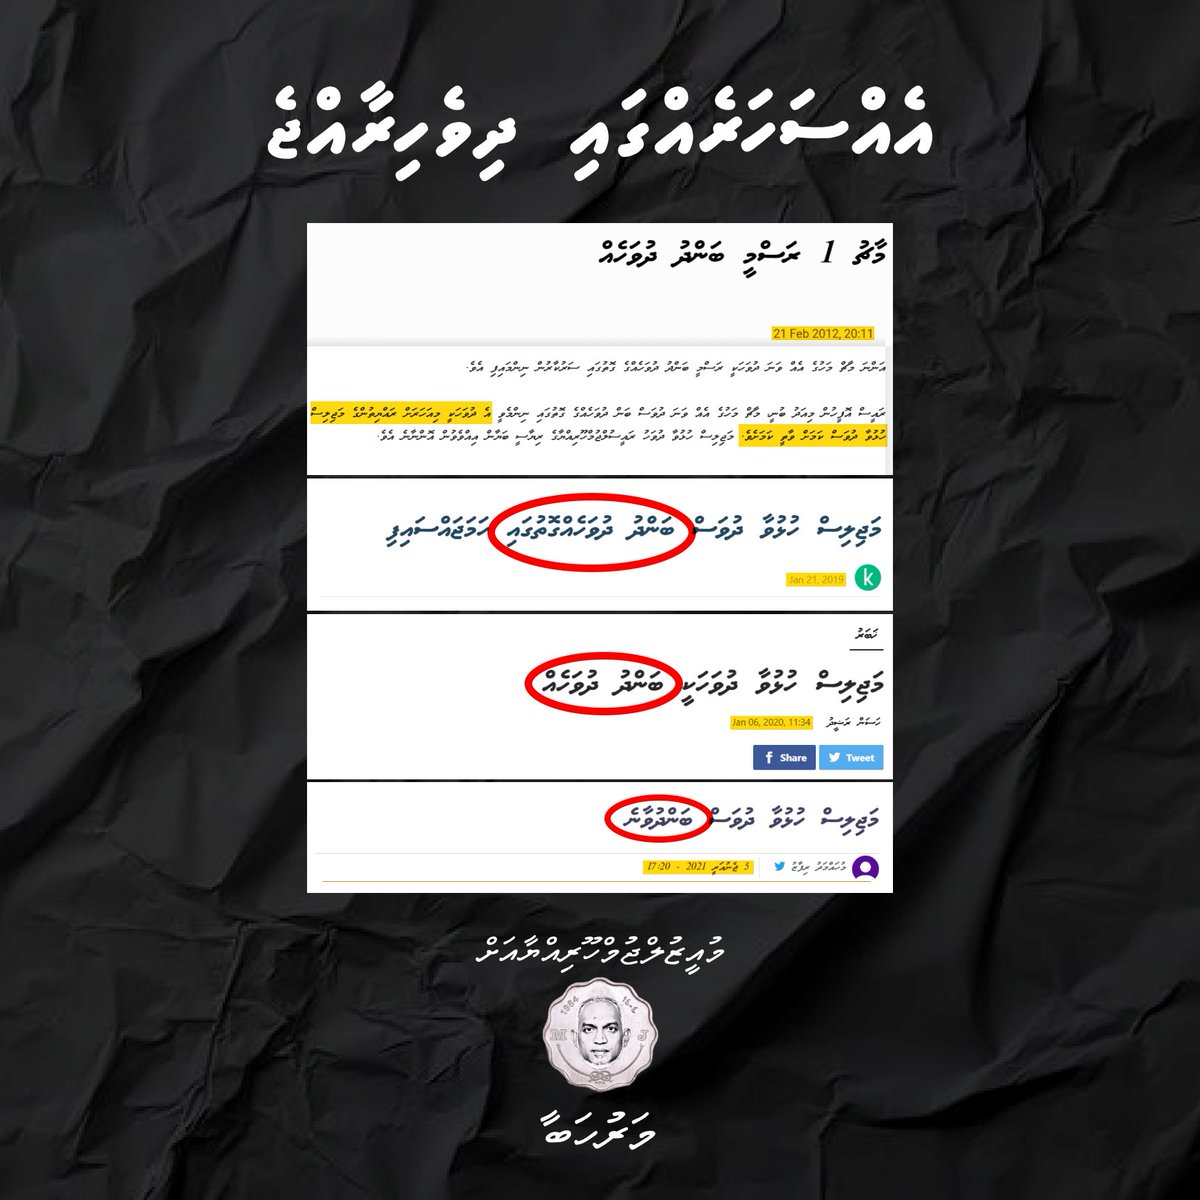 #EhsaharehgaiRaajje We used to be a proper country! No more public holidays to mark days like this because Muizzu used it all up for his campaign.